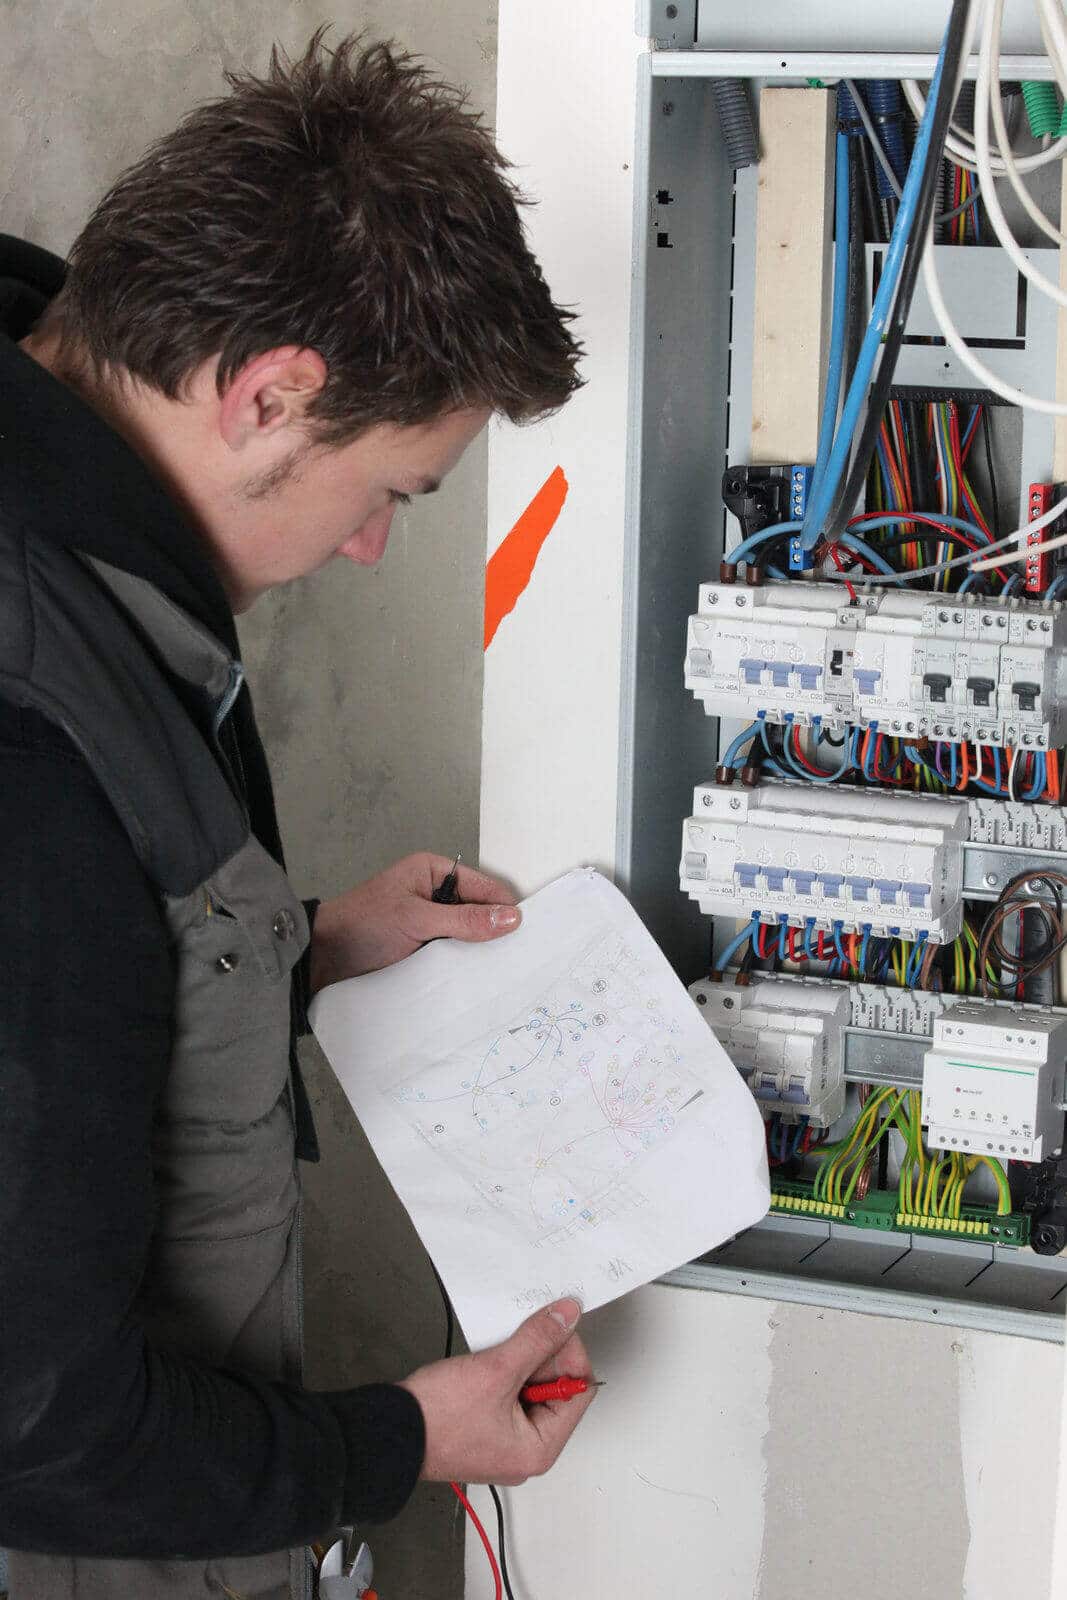 5658172 Electrician With Sketch Of Electrical Panel